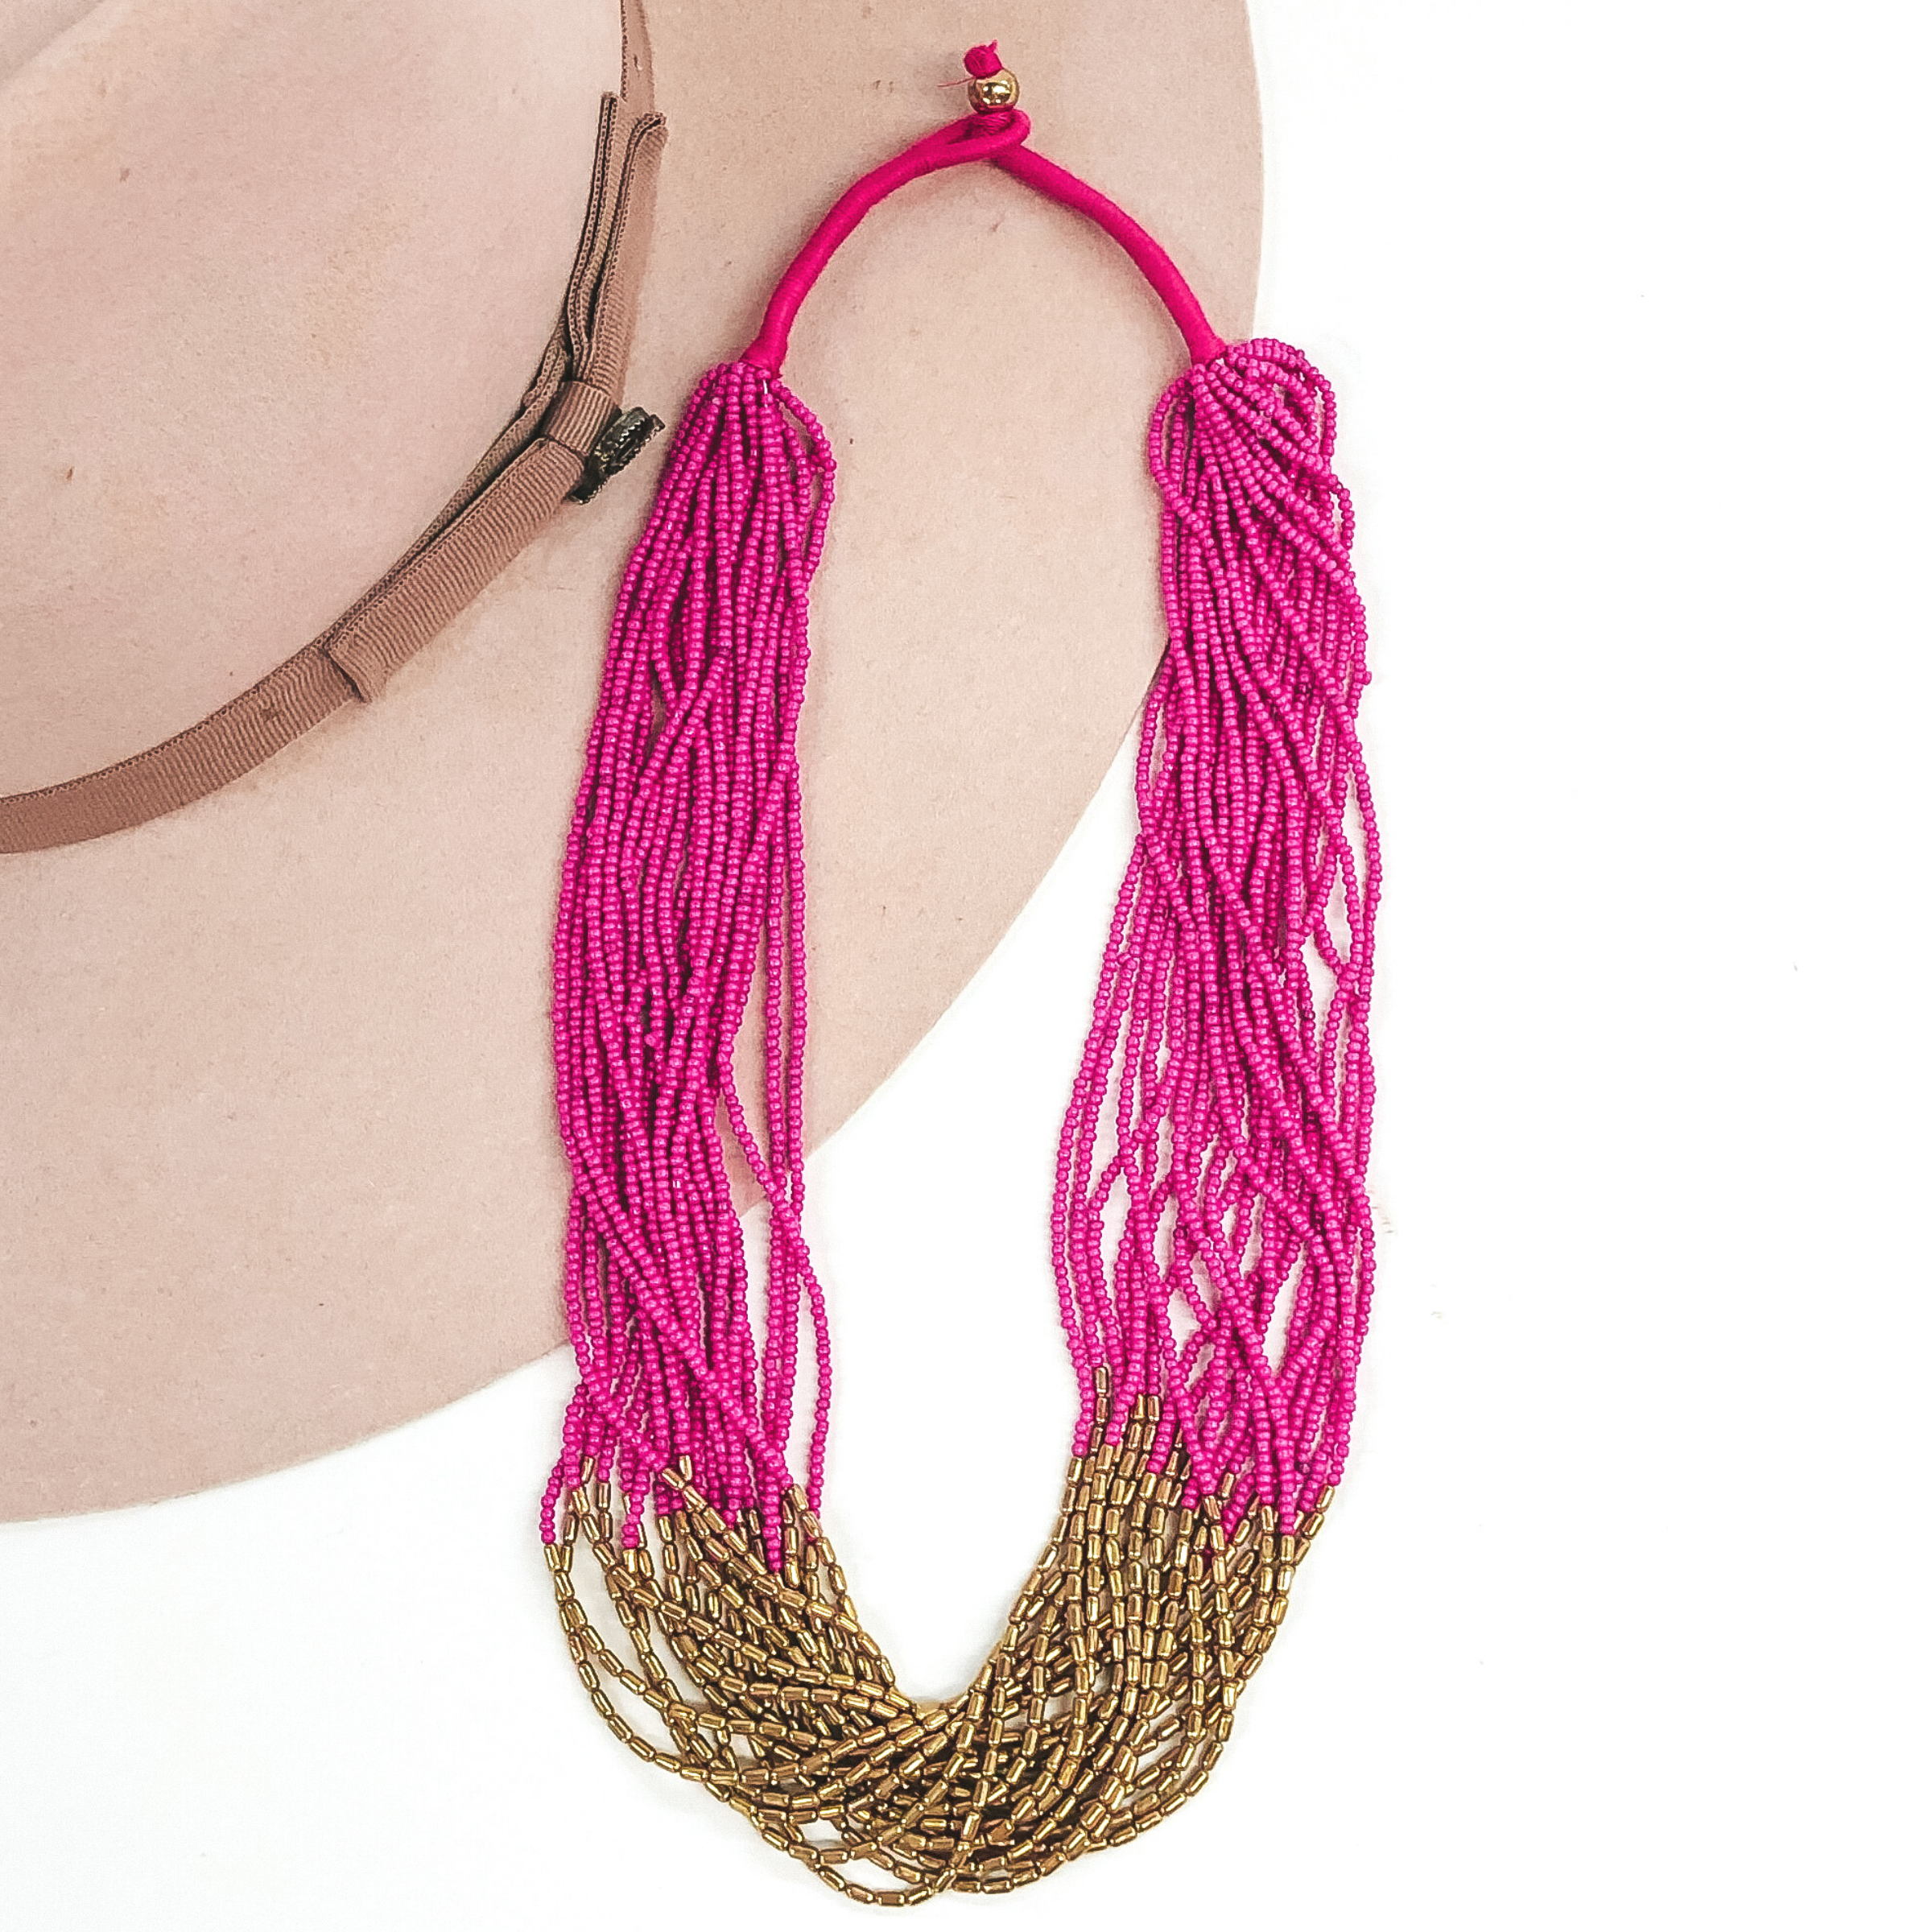 The strands on this necklace have fuchsia beads and gold beads in the middle of the string. There are a lot of single strings put together to make a single necklace. The necklace has a gold bead that goes through a loop to put the necklace on. This necklace is pictured laying on a beige hat on a white background.